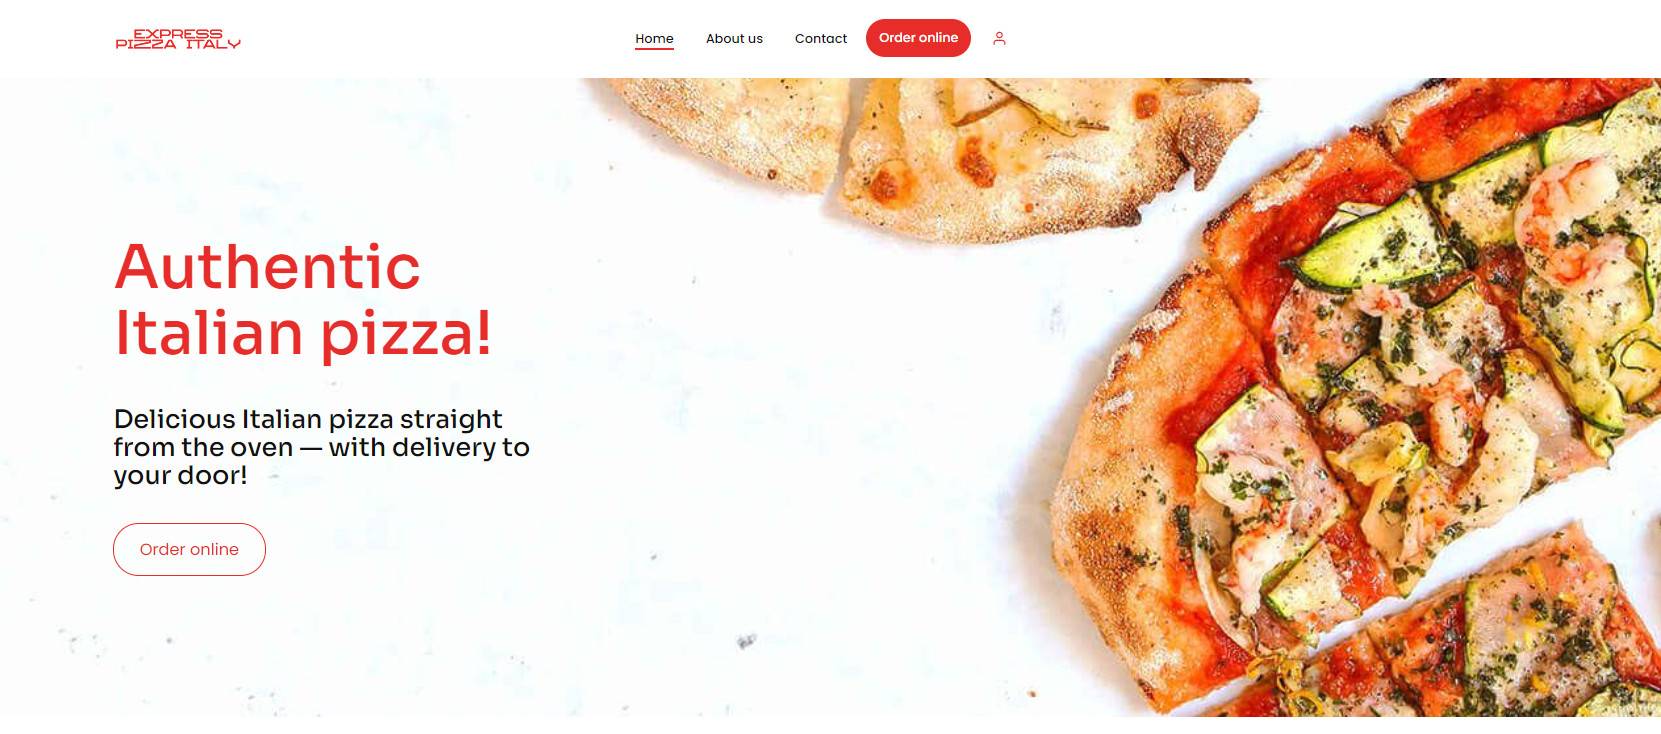 One of the best restaurant websites for pizzerias